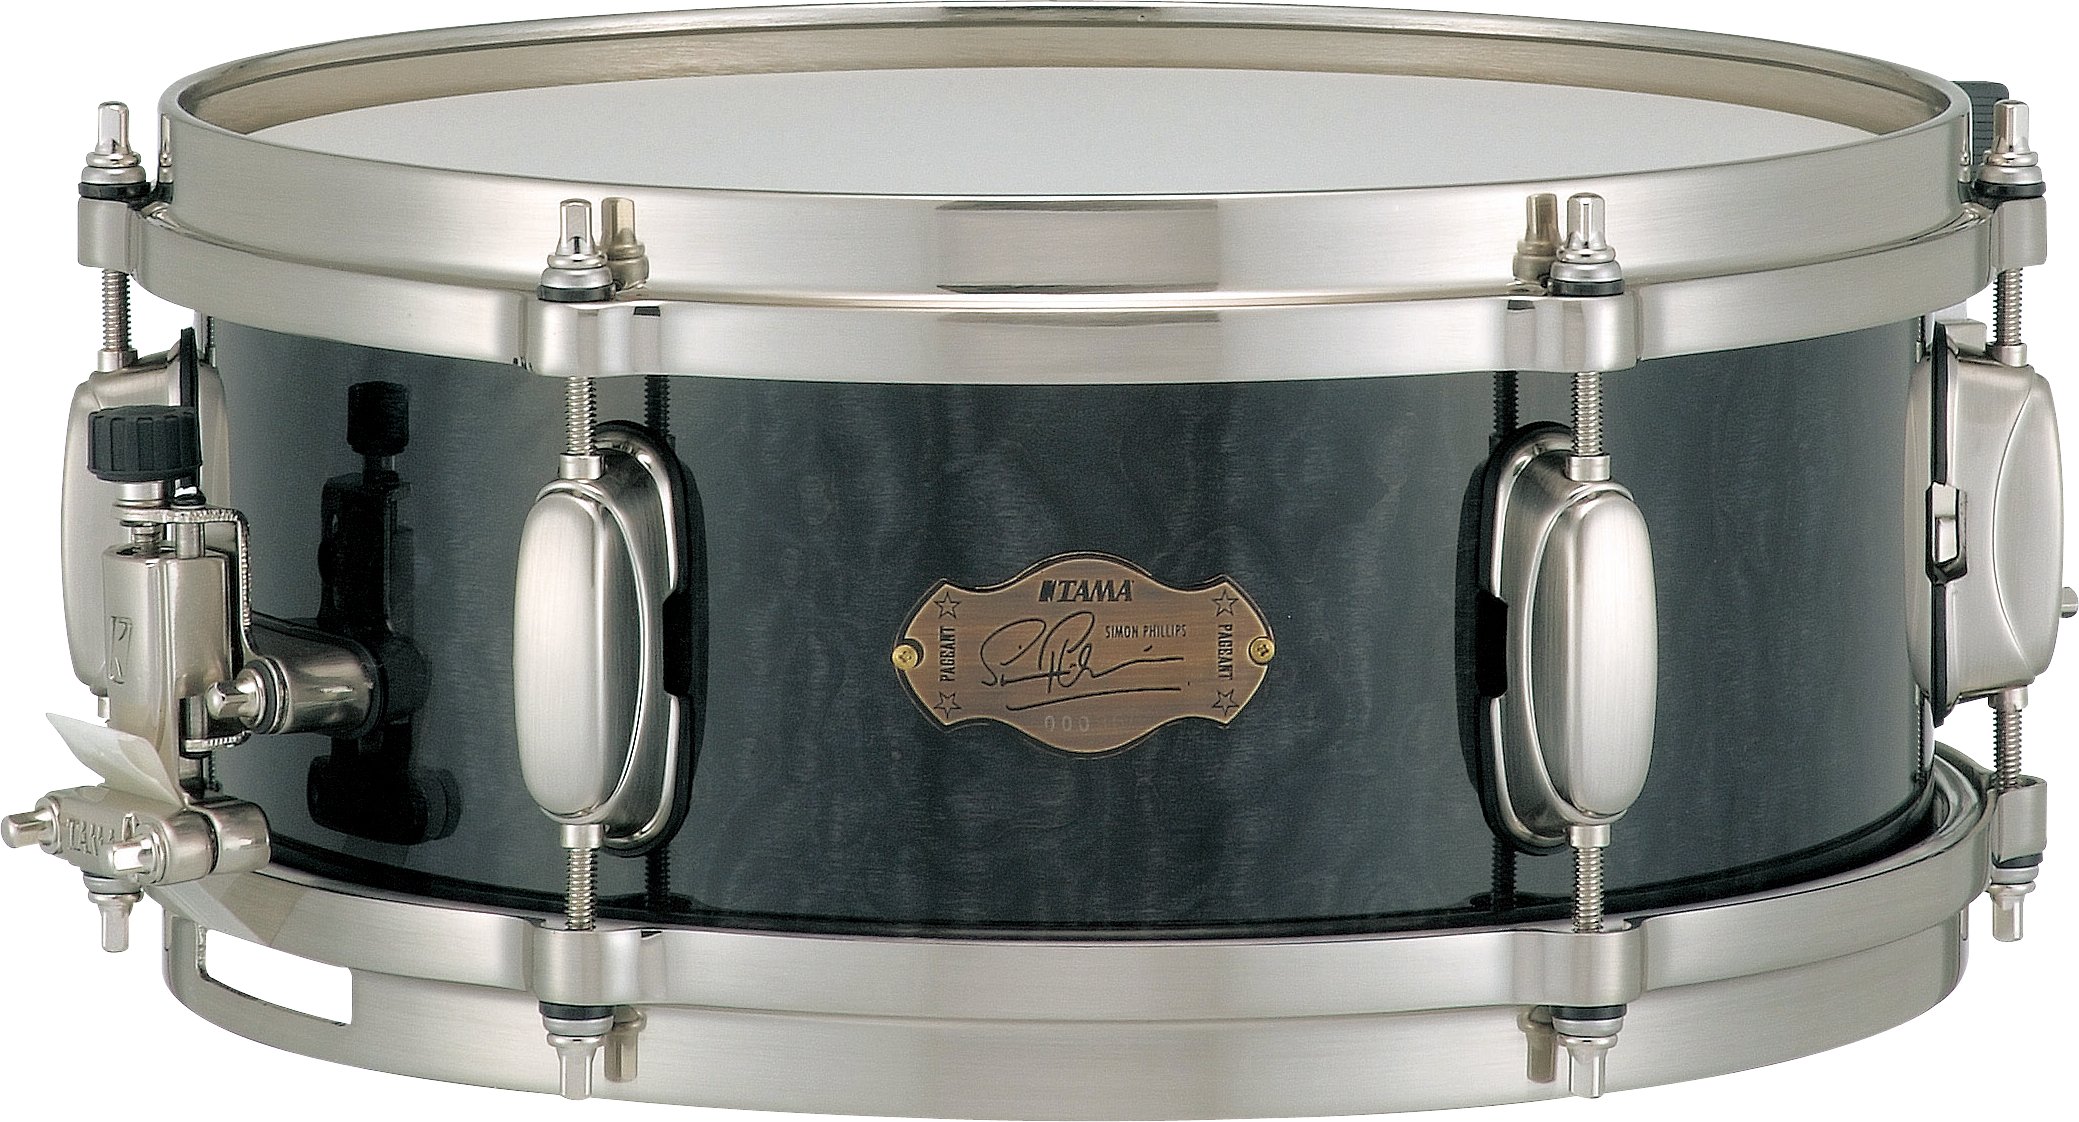 The Pageant Snare 12x5 Simon Phillips